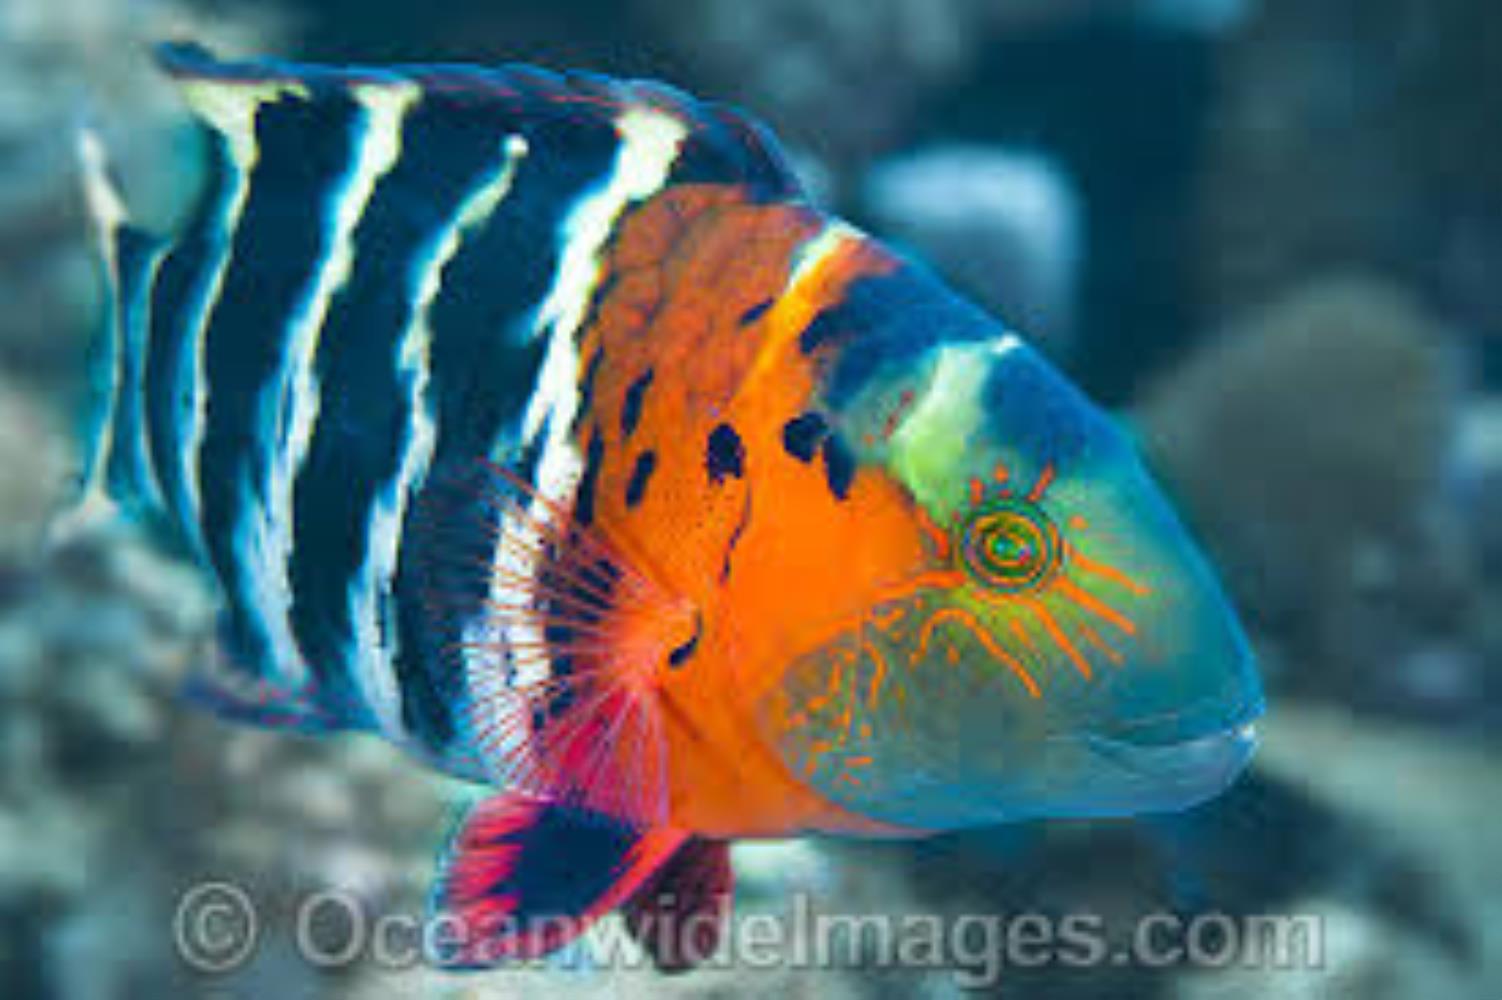 Redbreasted Wrasse